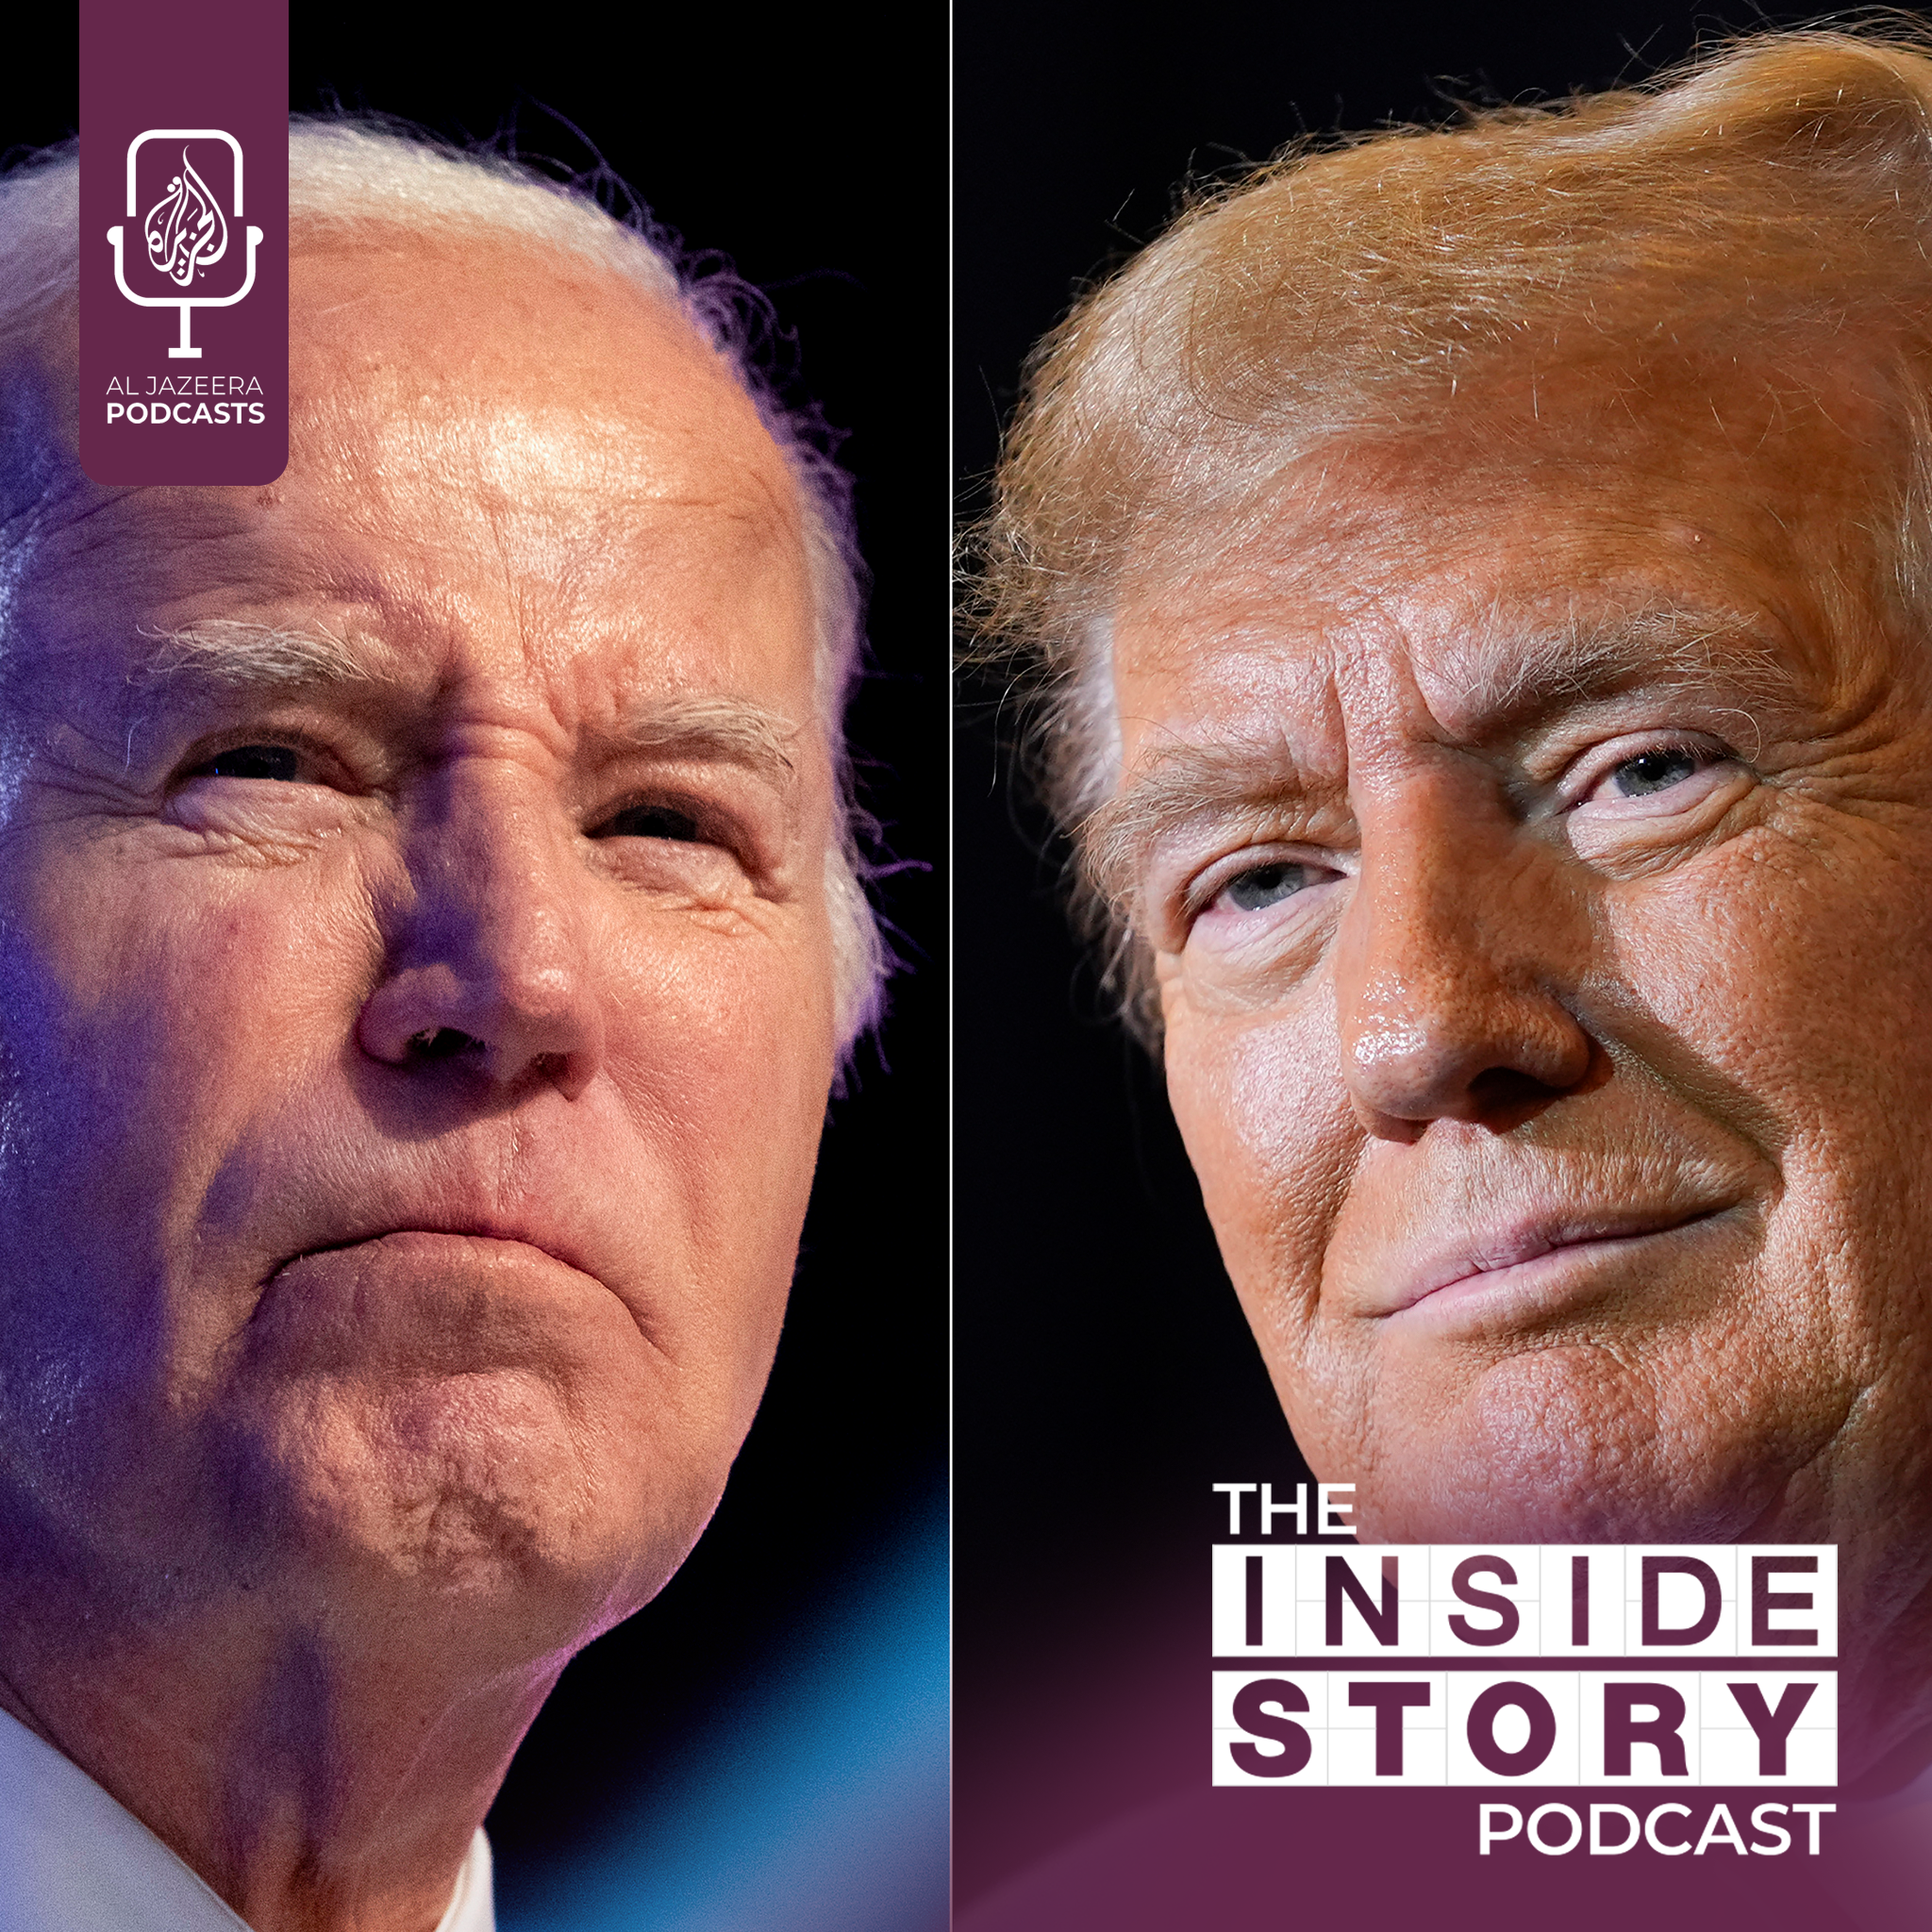 Will Joe Biden and Donald Trump face each other in the US election?